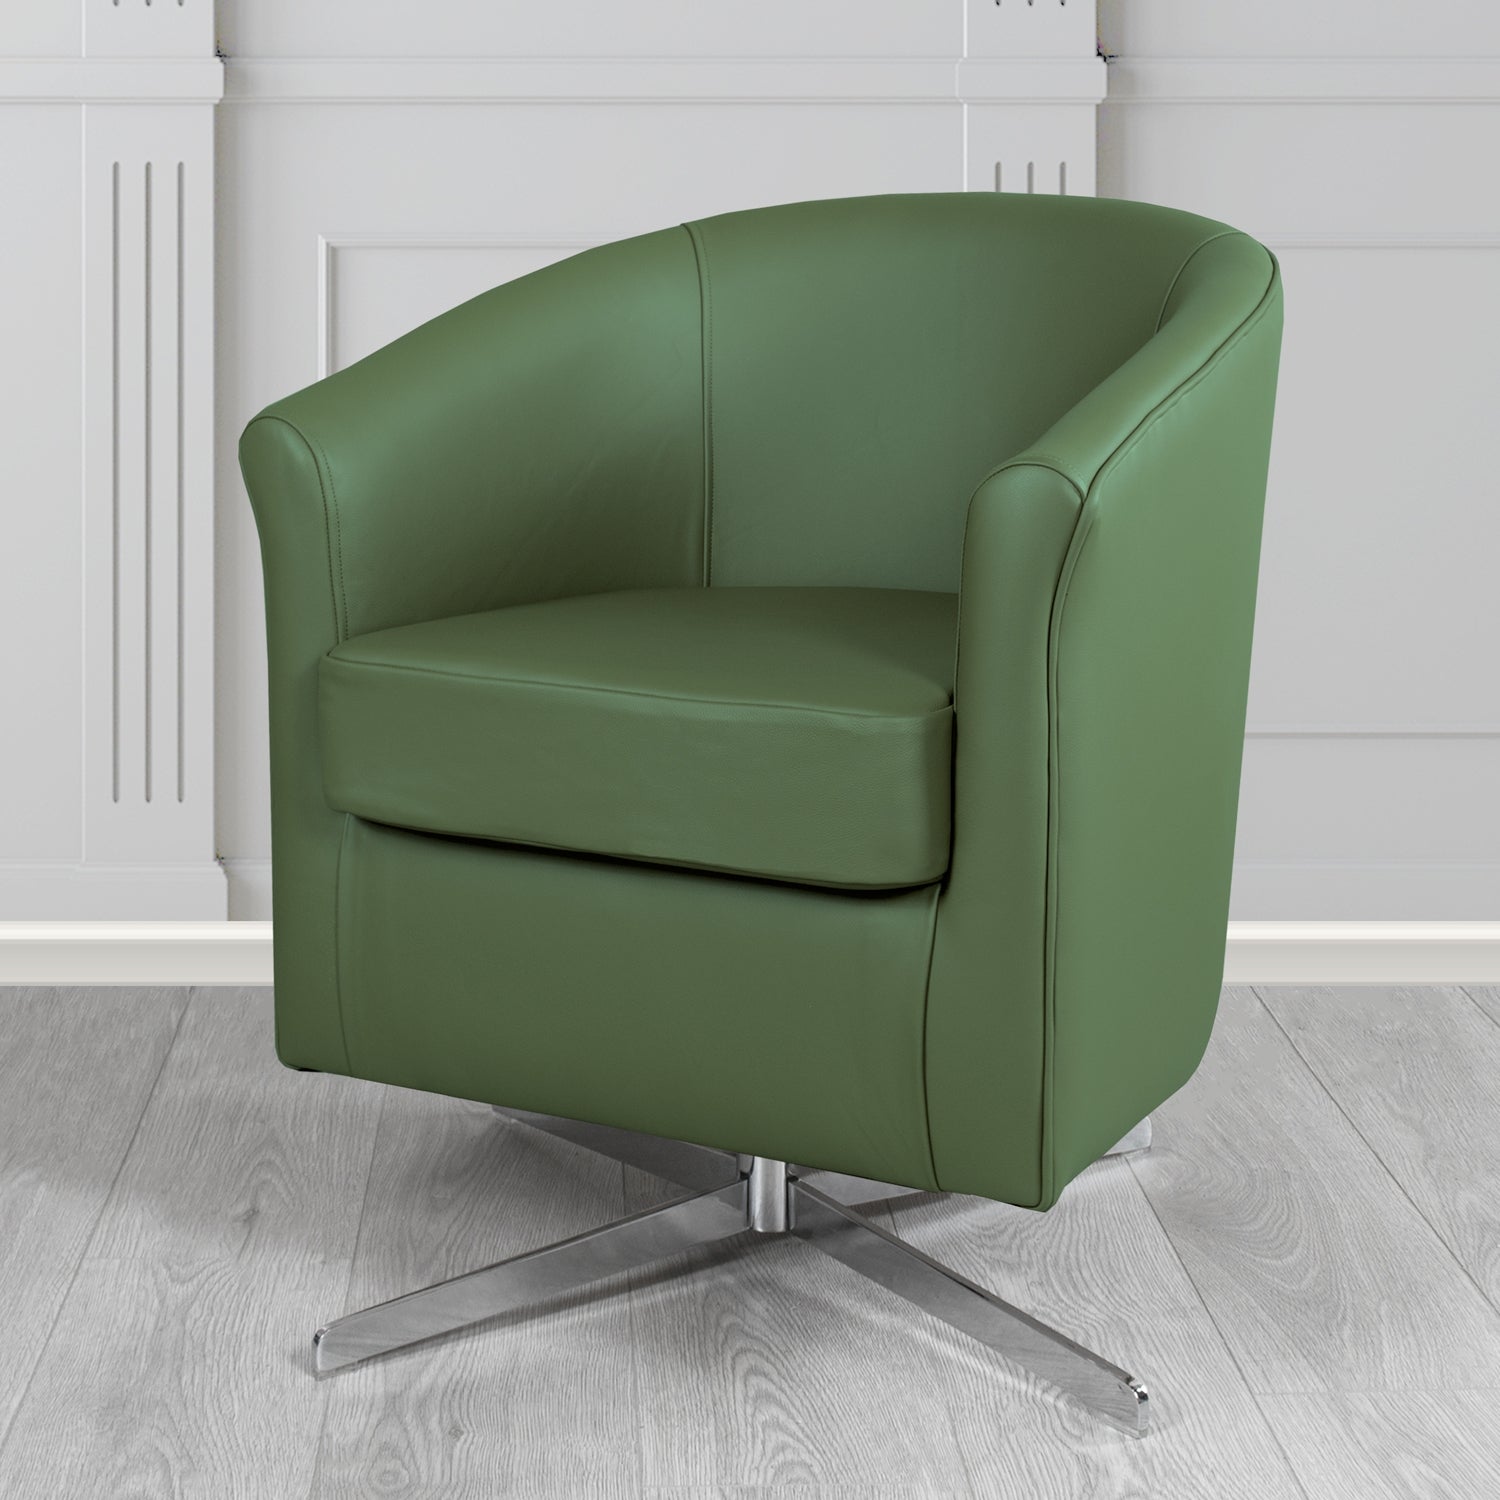 Cannes Swivel Tub Chair in Shelly Forest Green Crib 5 Genuine Leather - The Tub Chair Shop